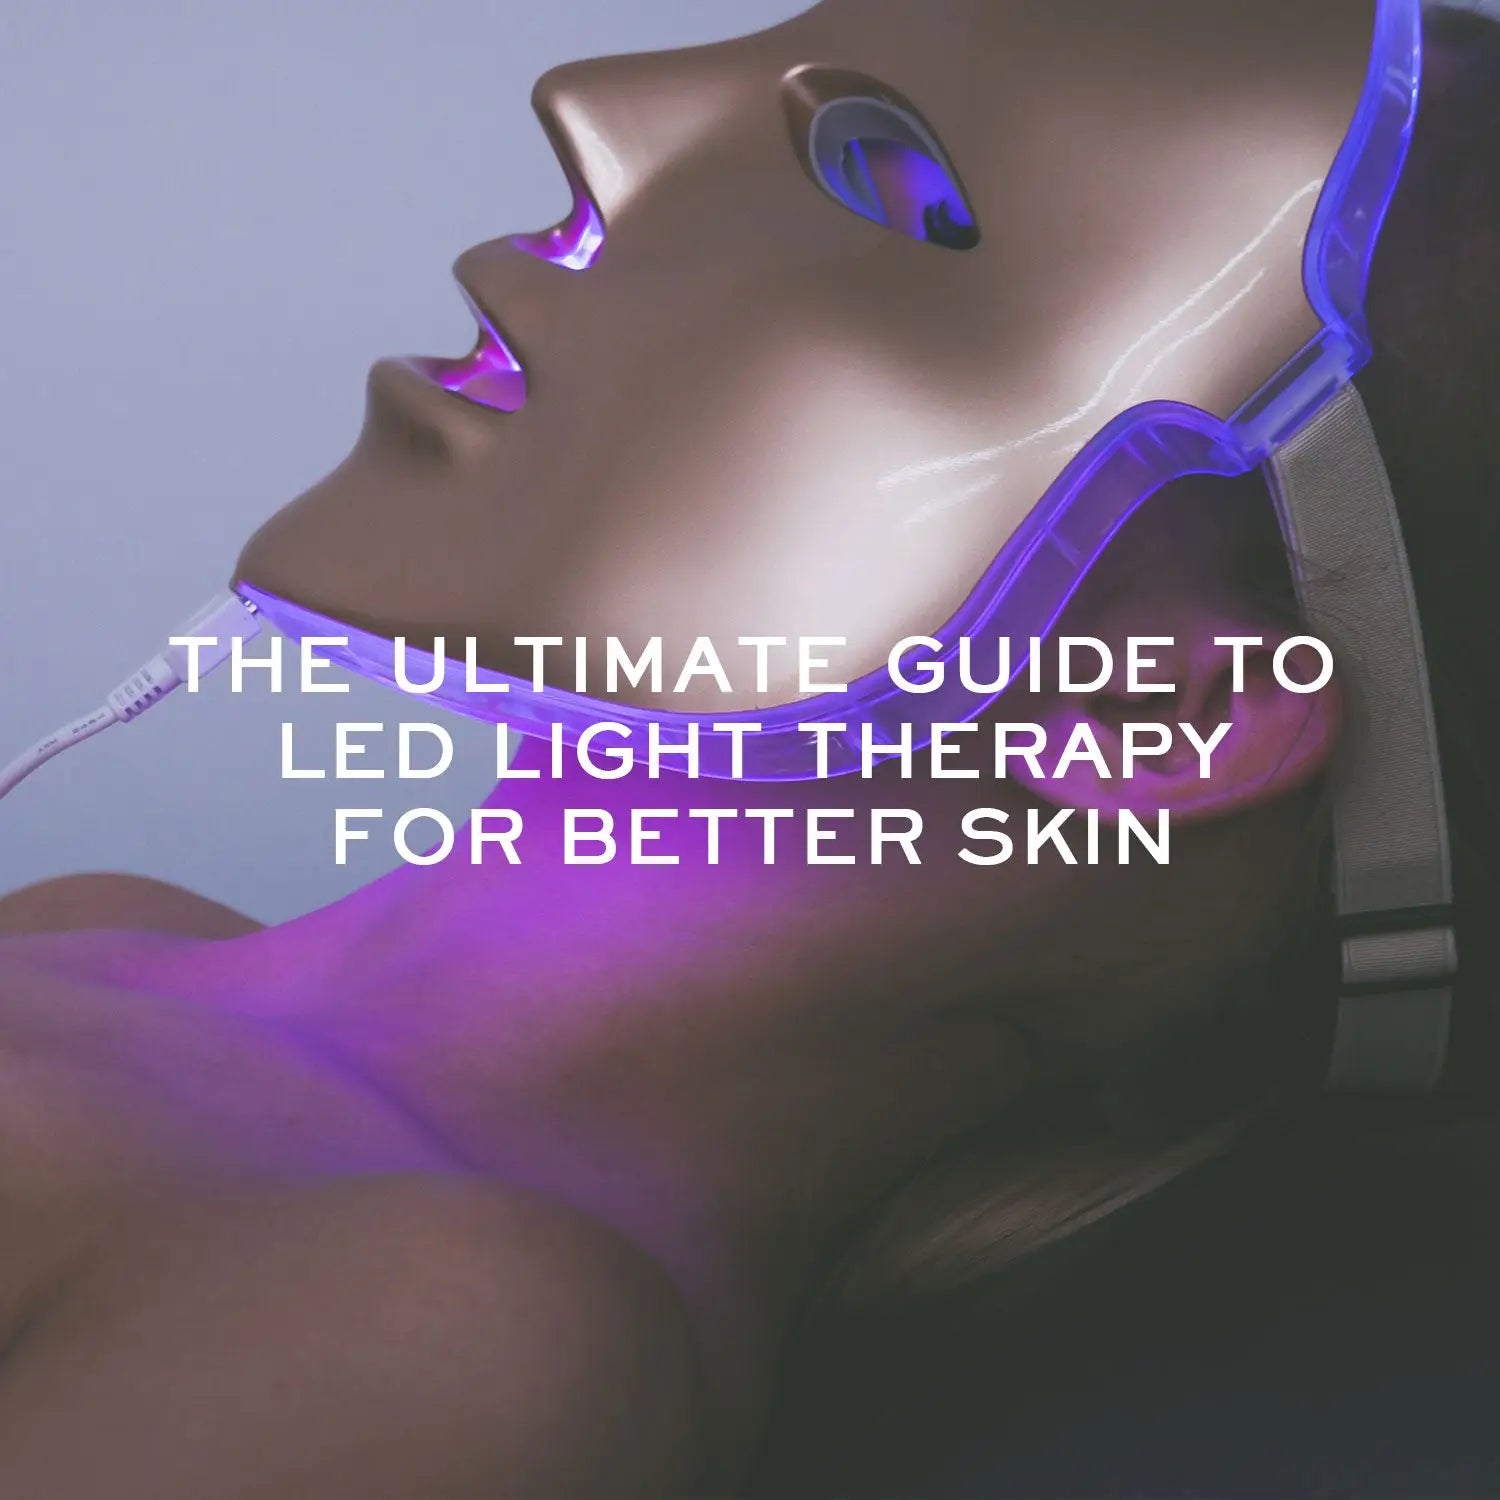 THE ULTIMATE GUIDE TO LED LIGHT THERAPY FOR BETTER SKIN